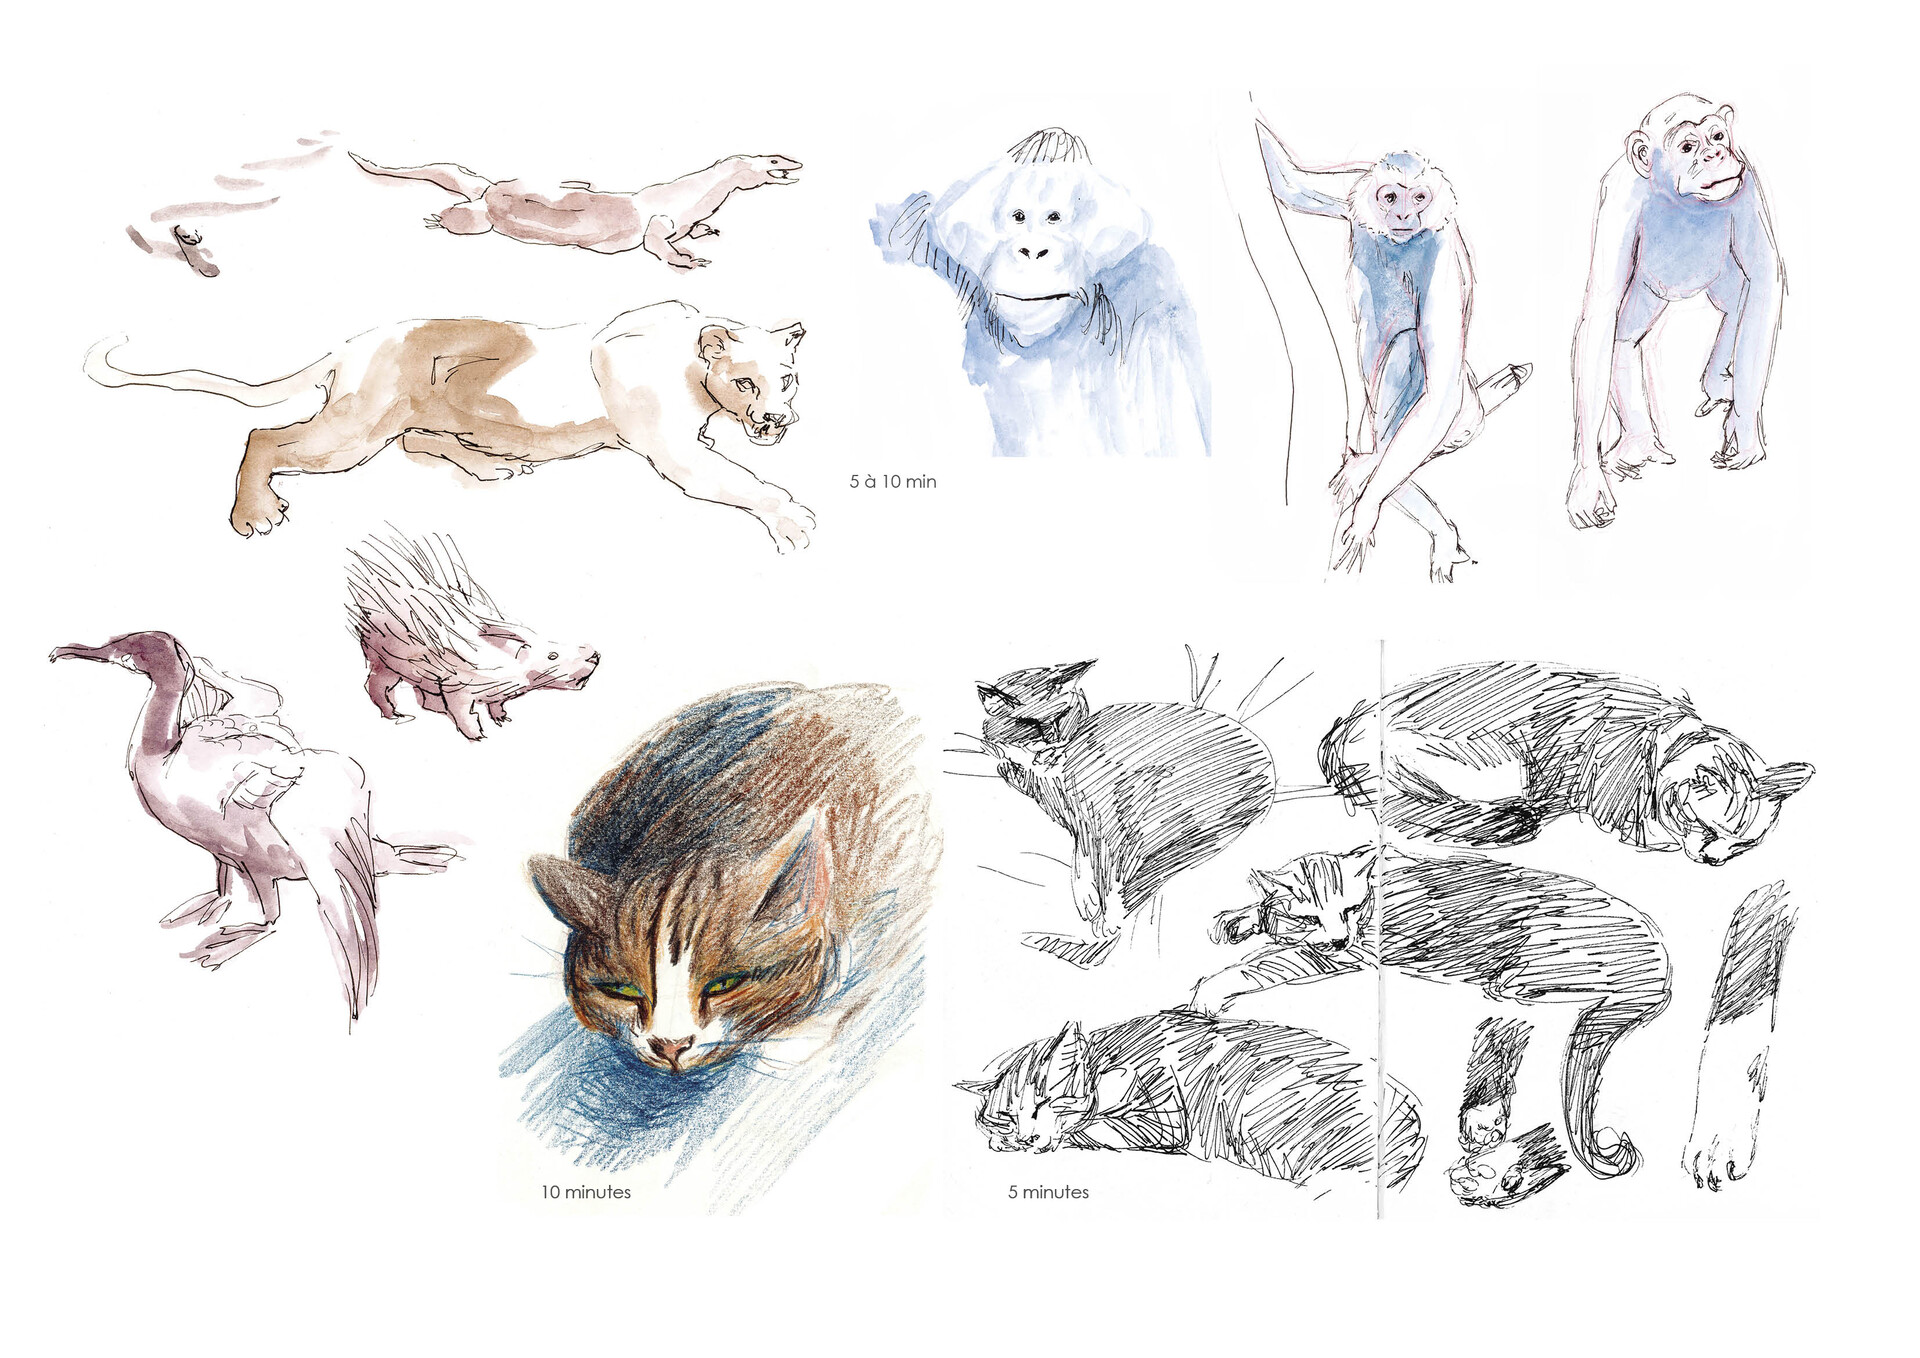 ArtStation - Observation drawing - Animals, objects, movies